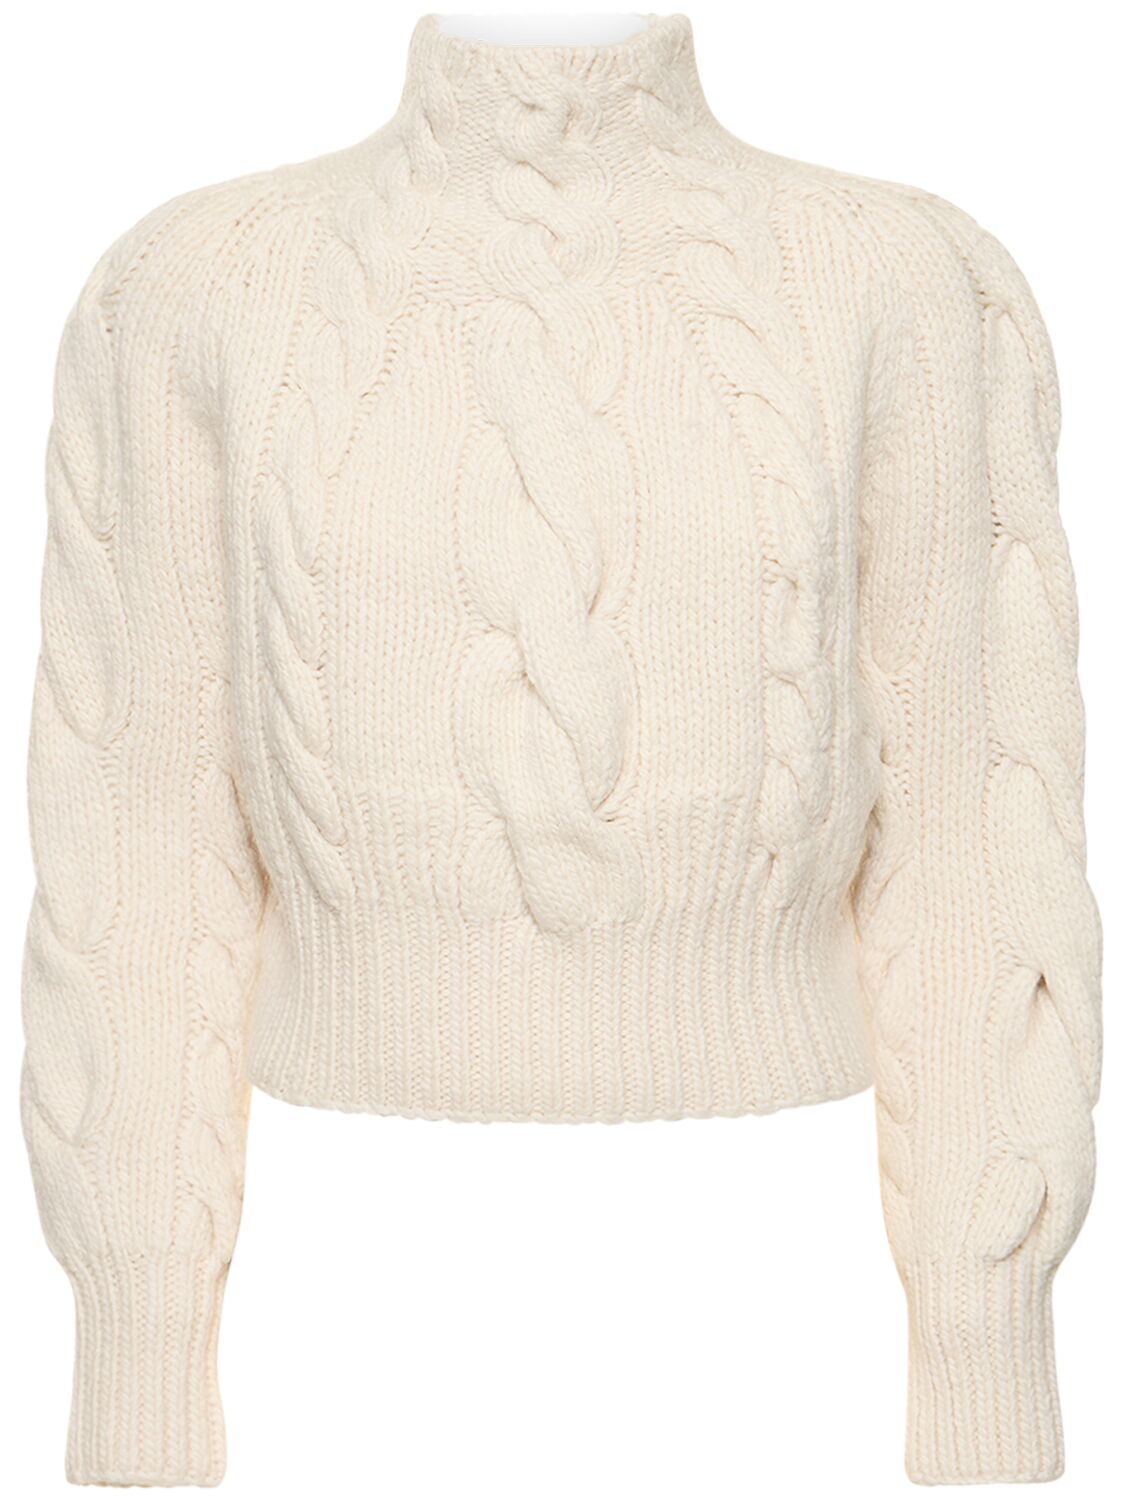 Image of Luminosity Cable Knit Wool Sweater